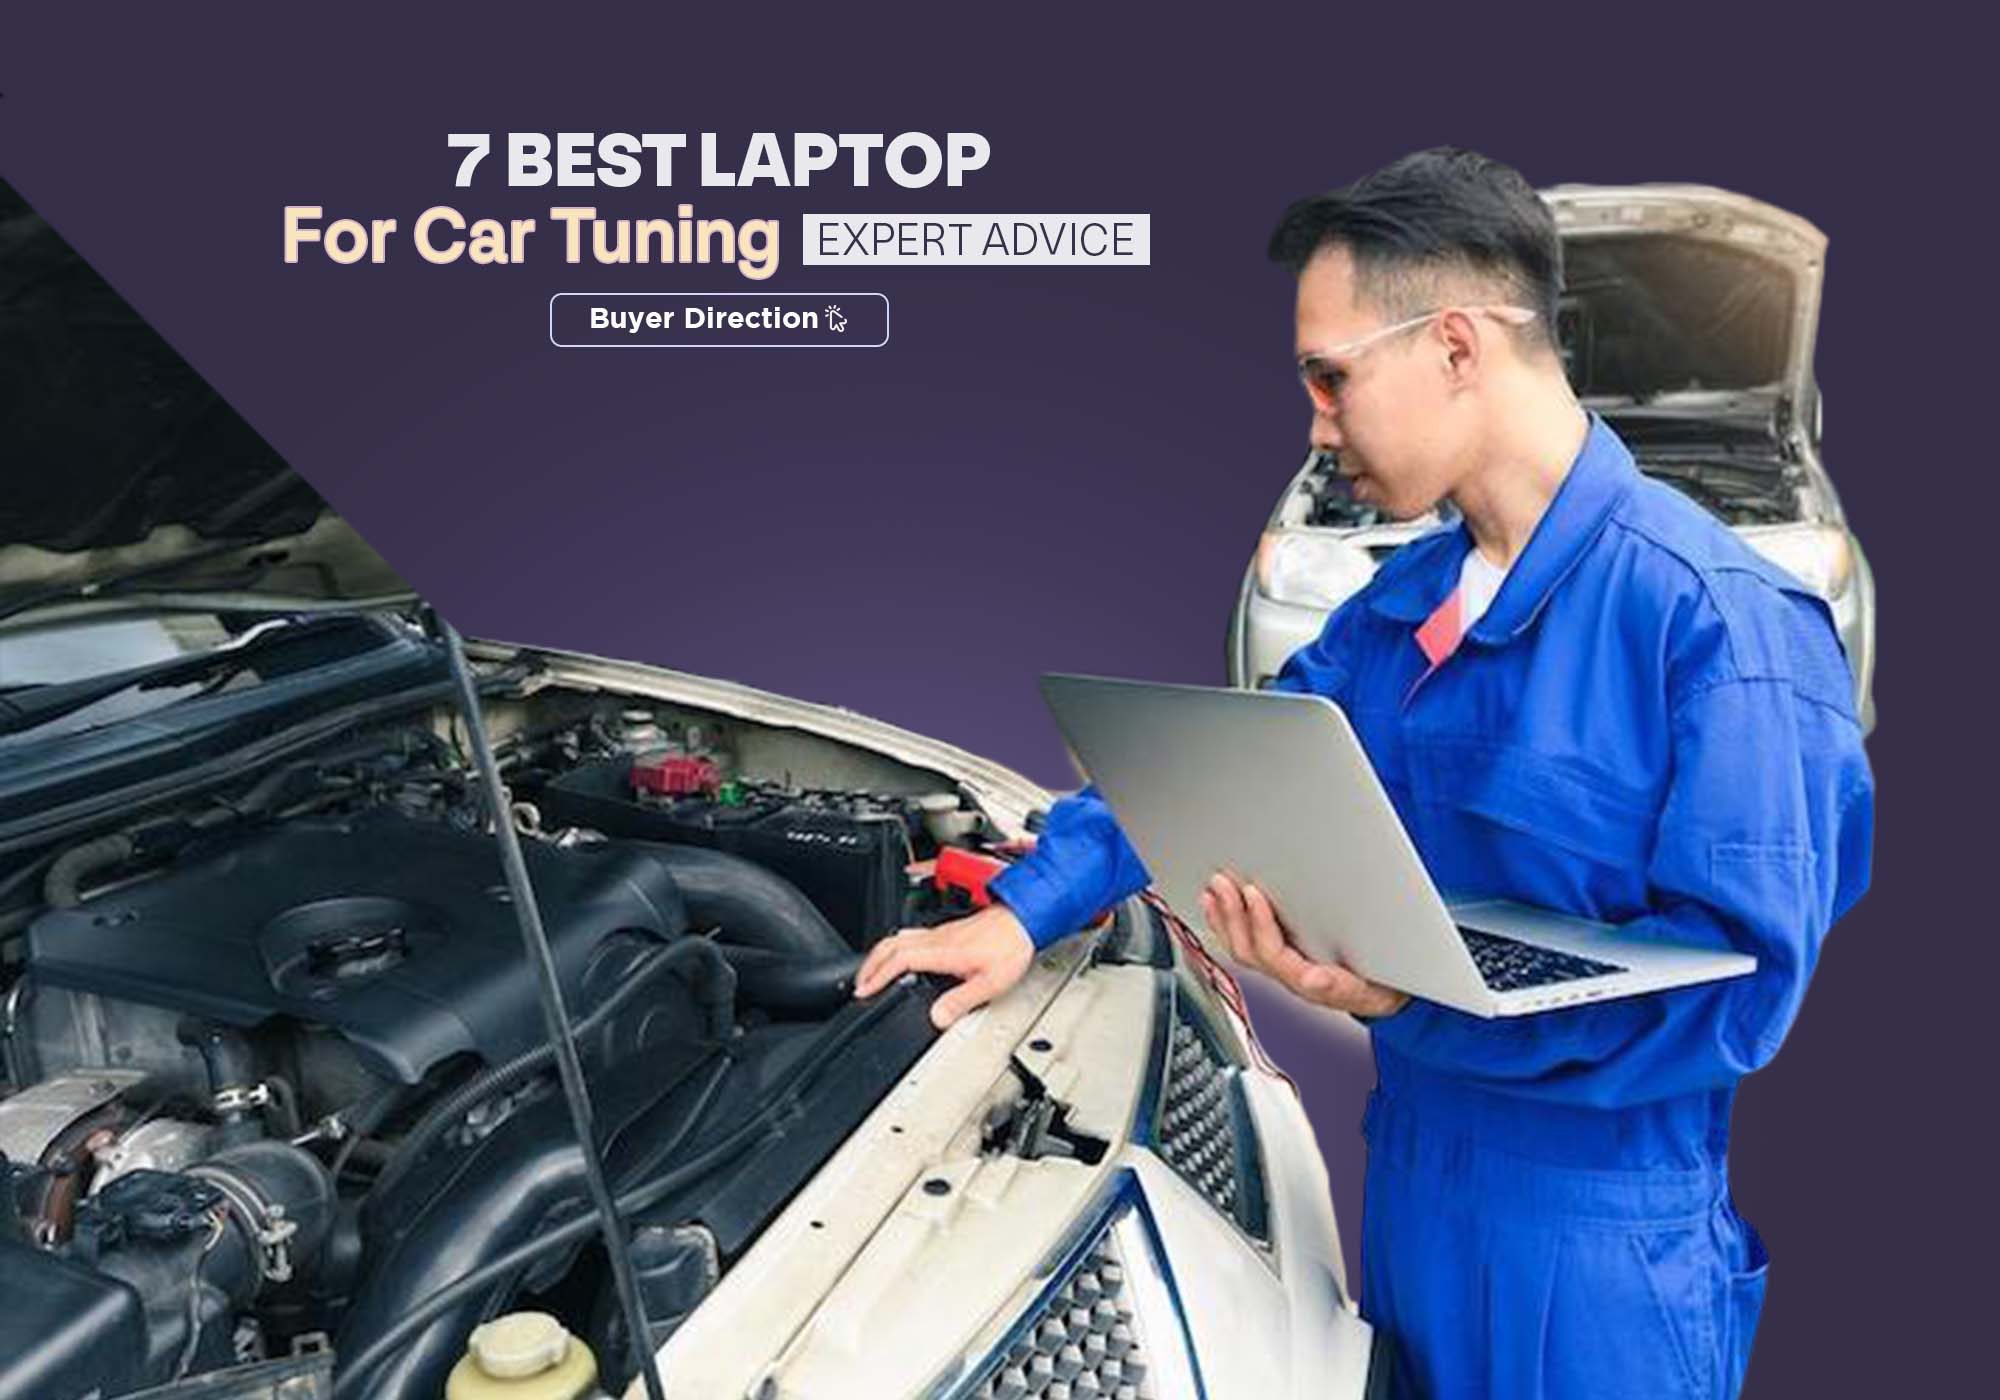 7 Best Laptop for Car Tuning - Expert Advice